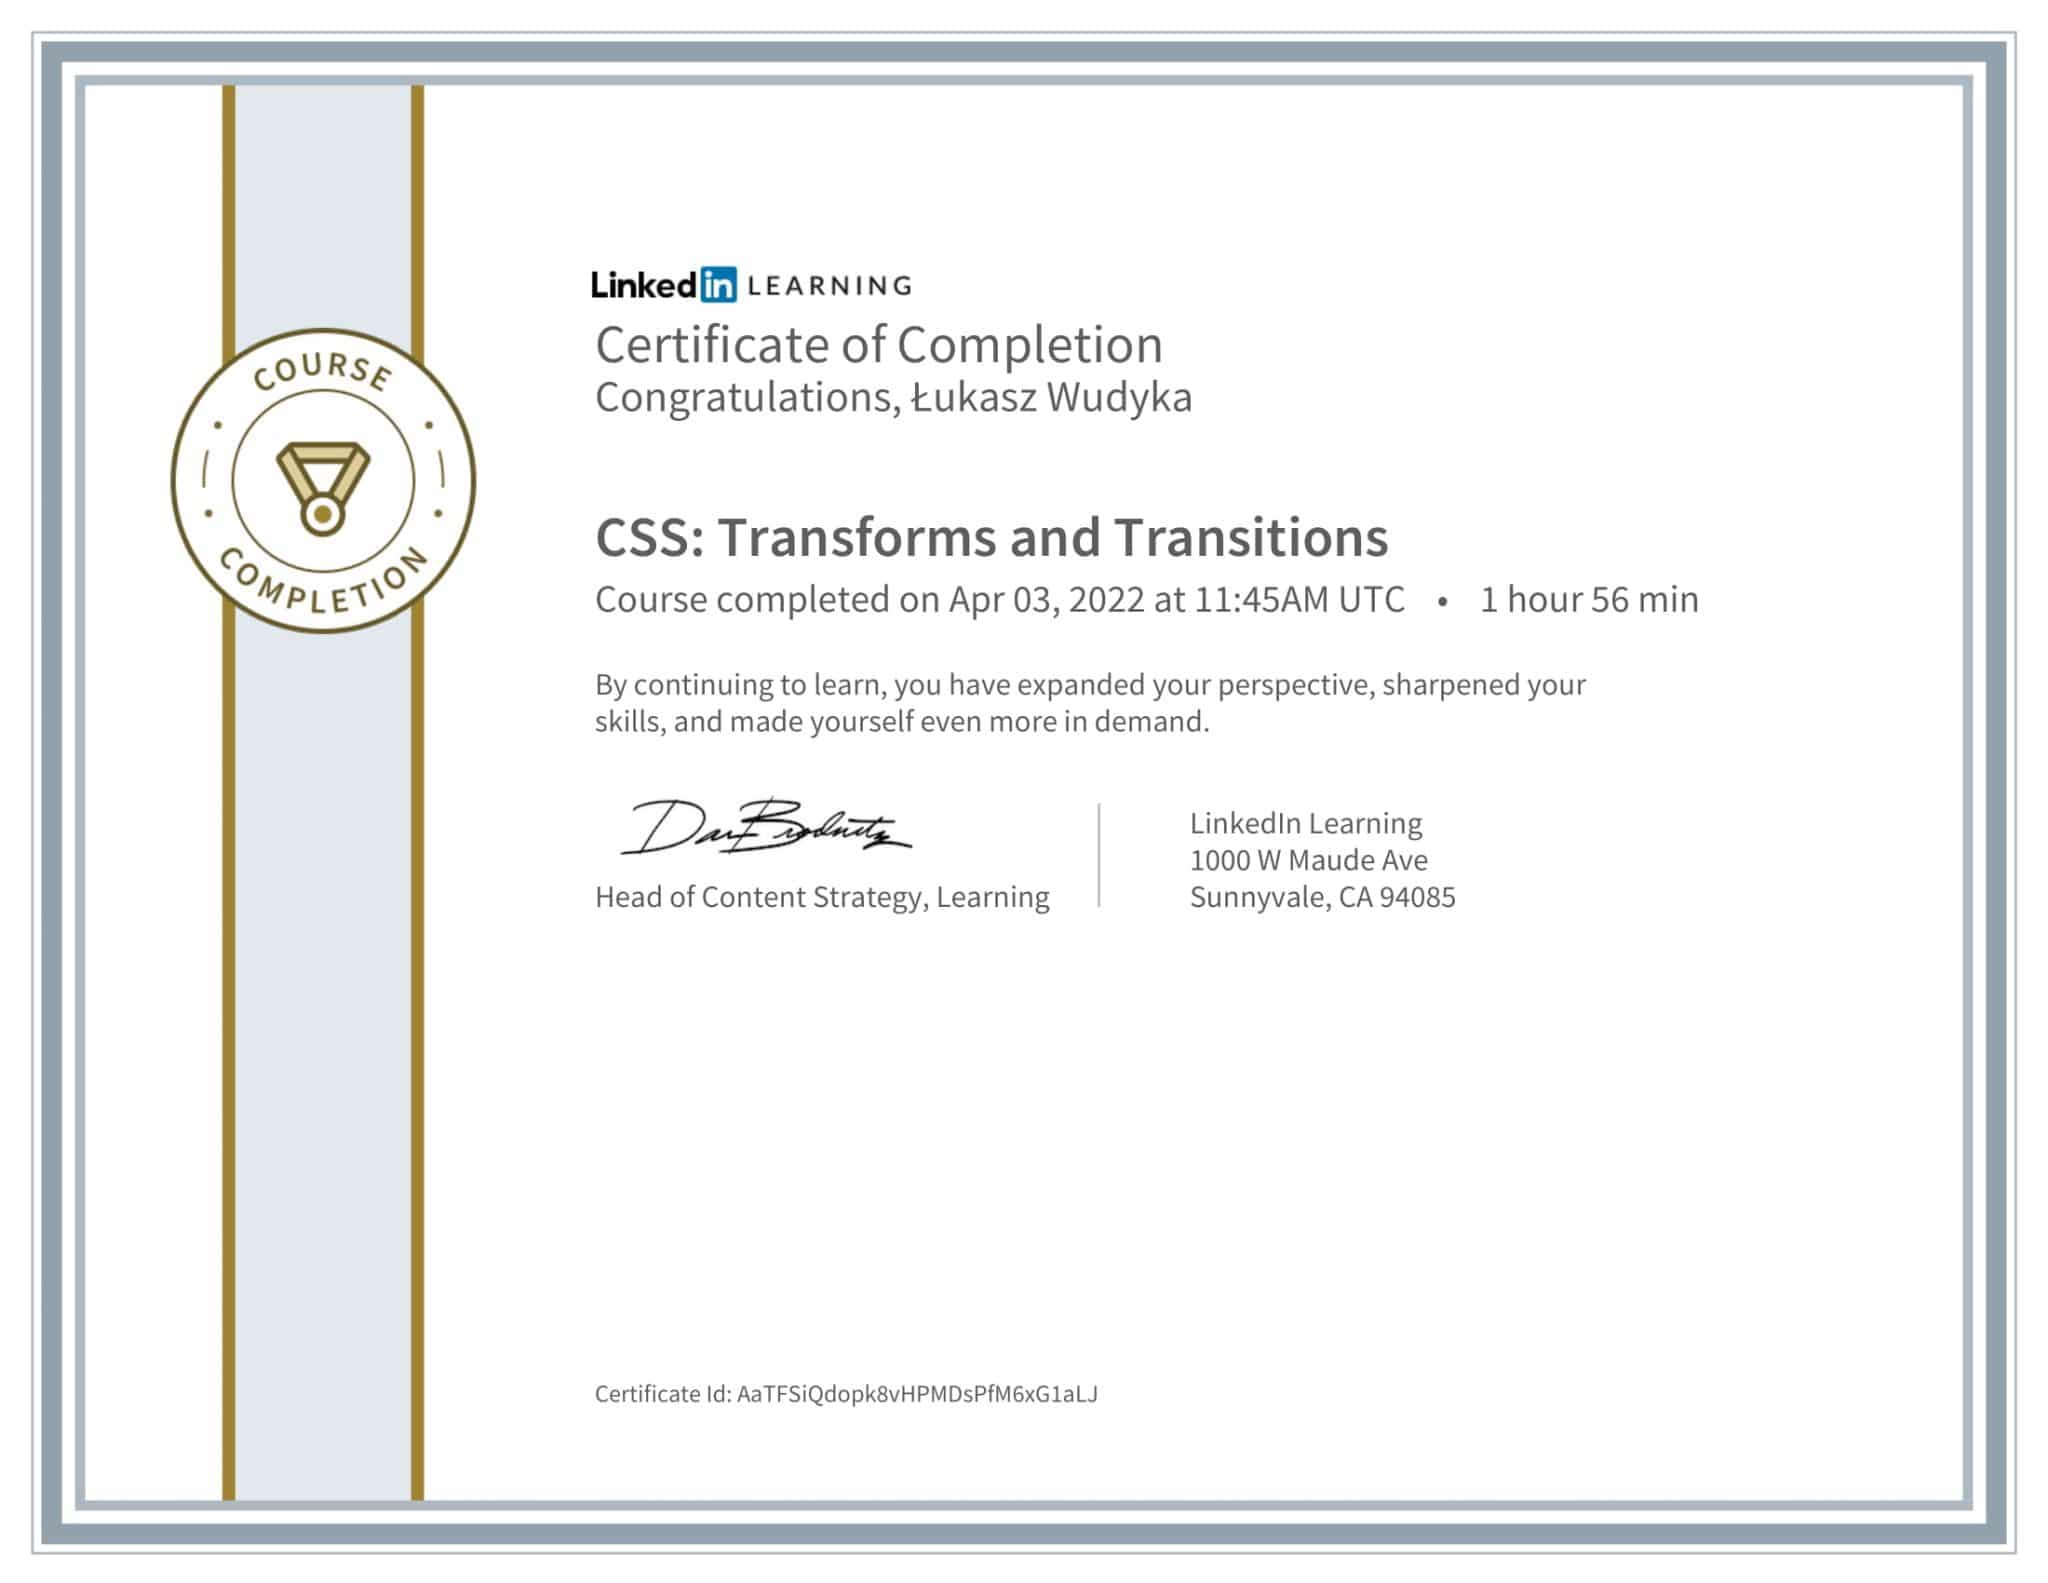 CertificateOfCompletion_CSS Transforms and Transitions-1